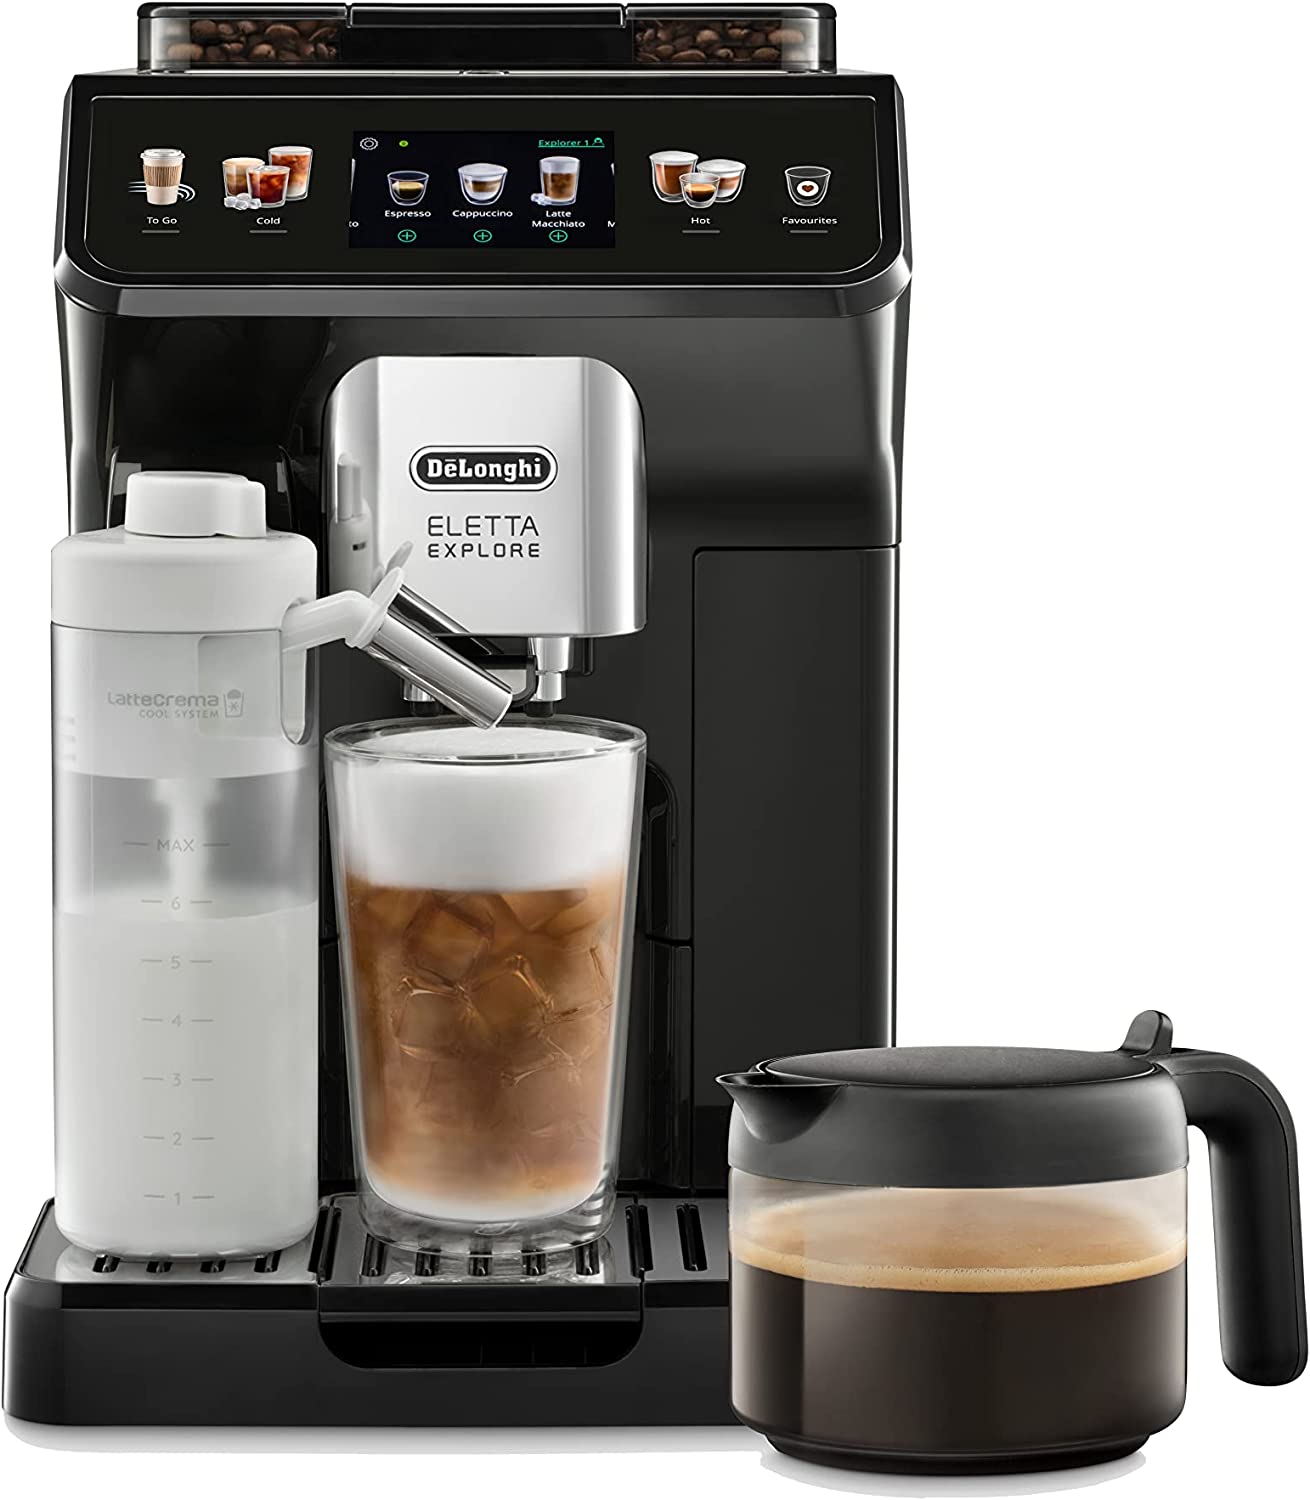 DeLonghi De\'Longhi Eletta Explore Perfetto ECAM452.57.G Fully Automatic Coffee Machine with LatteCrema Milk System, Hot and Refreshing Drinks at the Touch of a Button, 3.5 Inch TFT Touchscreen Colour Display, Coffee Pot Included